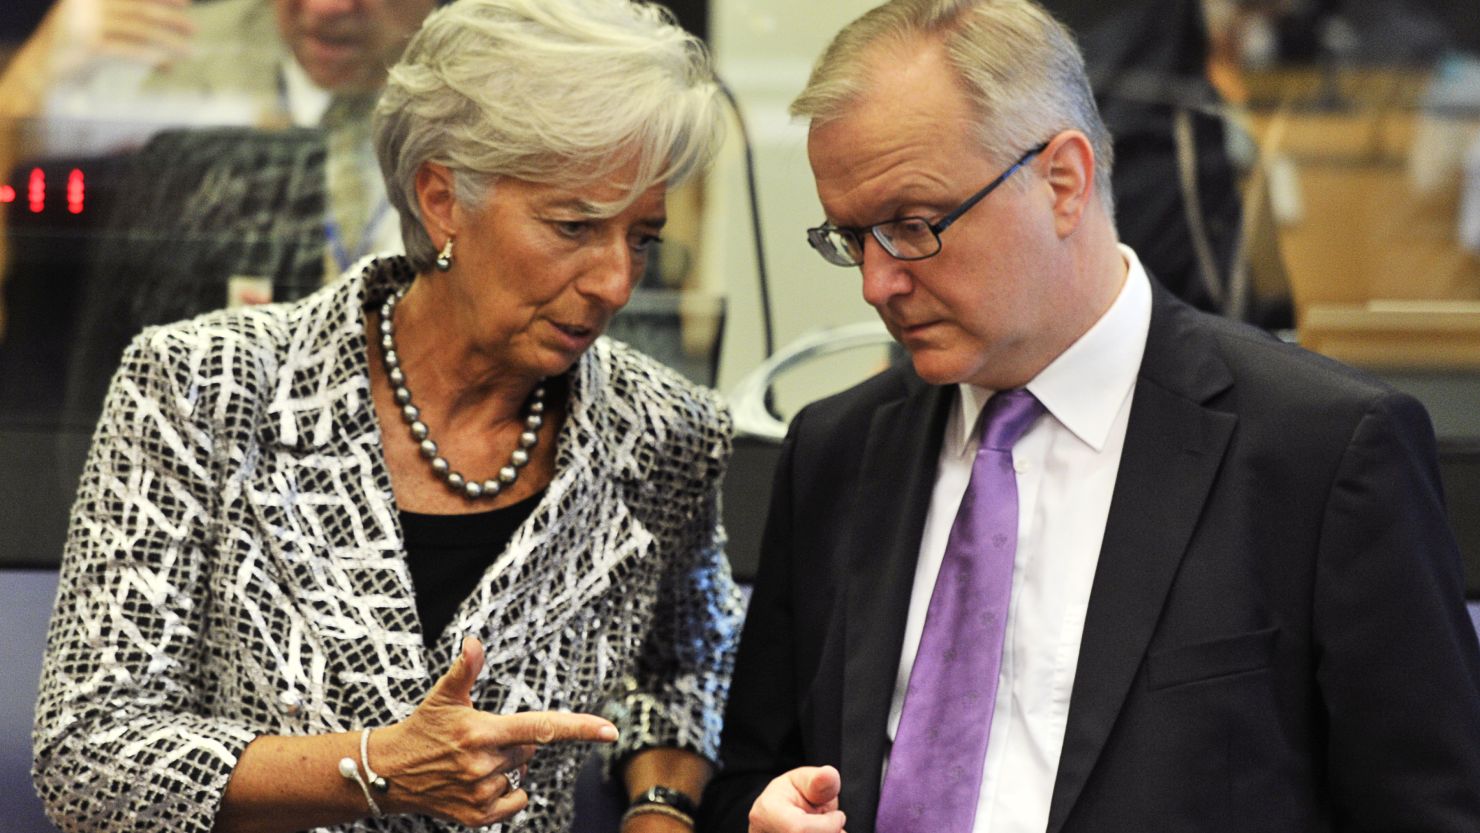 International Monetary Fund Managing Director Christine Lagarde and EU Commissioner Olli Rehn before an Eurozone Council meeting in June.